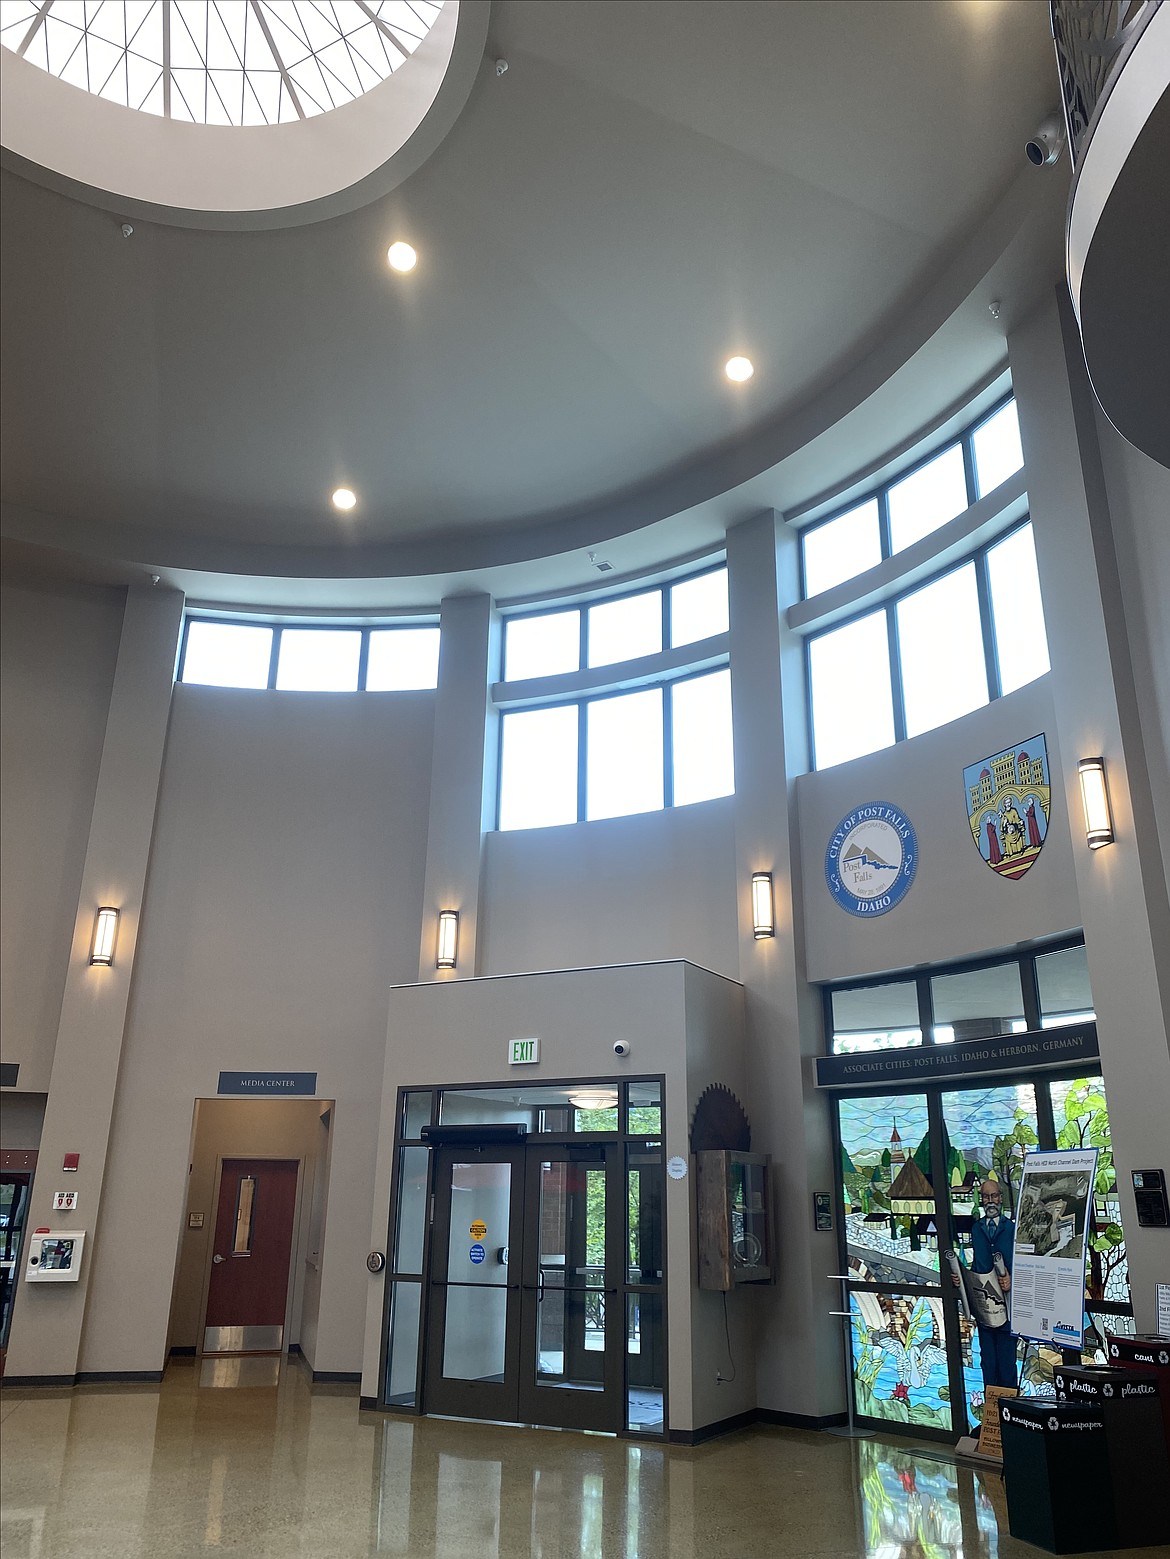 The lobby in Post Falls City Hall